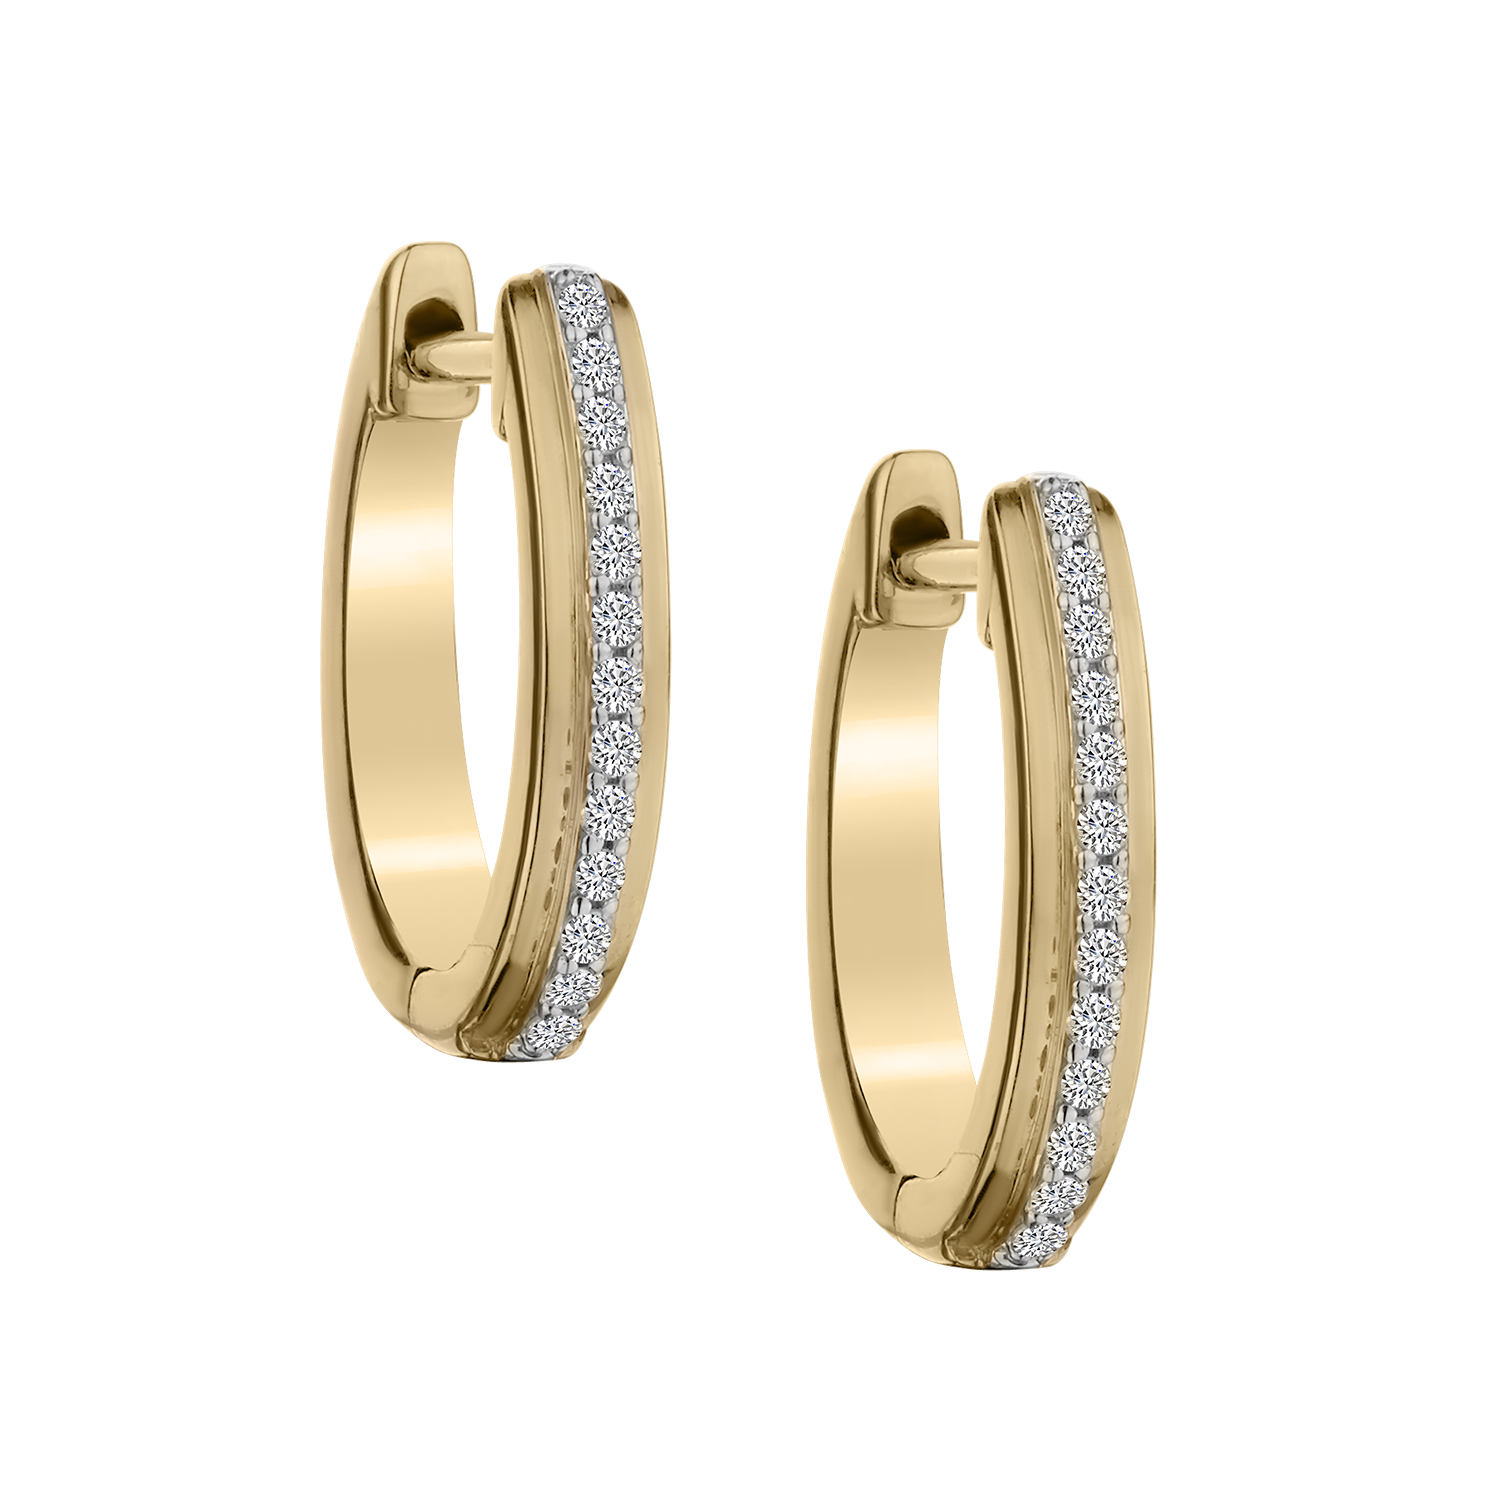 .15 CARAT DIAMOND EARRINGS, 10kt YELLOW GOLD, WITH 14kt YELLOW GOLD POSTS......................NOW